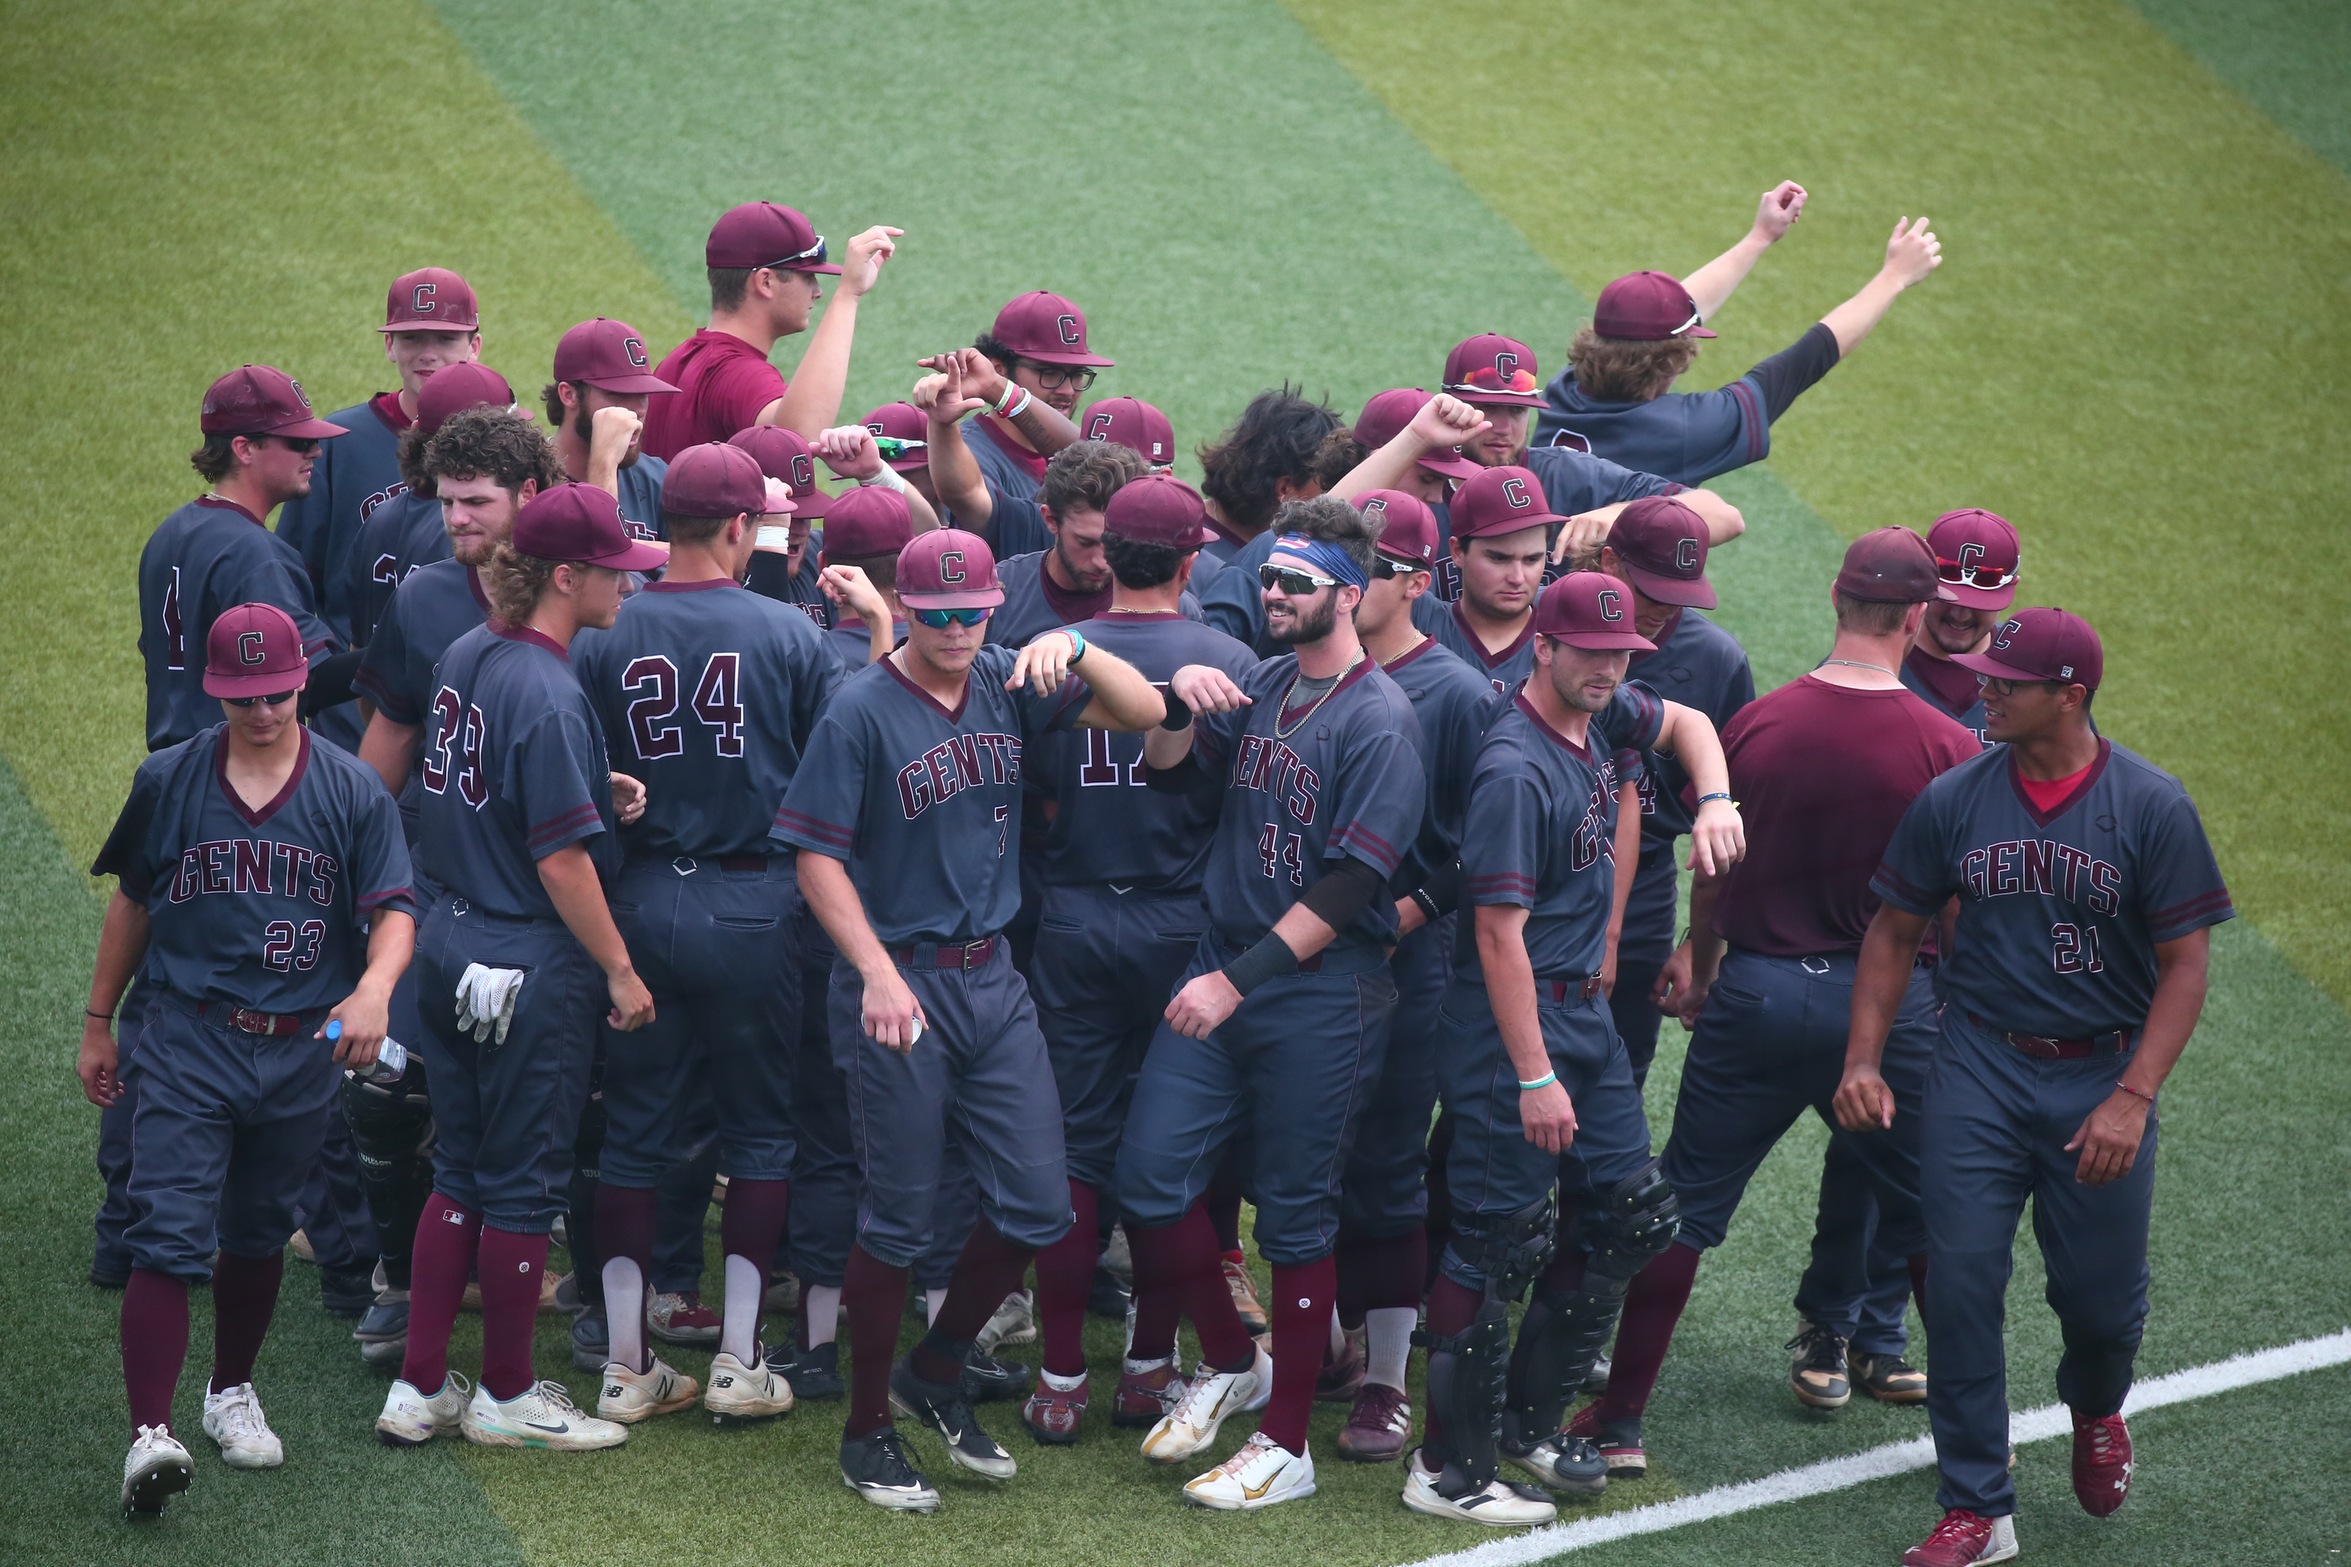 The No. 3 seed Diamond Gents advanced to the SCAC championship game for the first time since 2018 with their 12-8 win over No. 1 seed Trinity